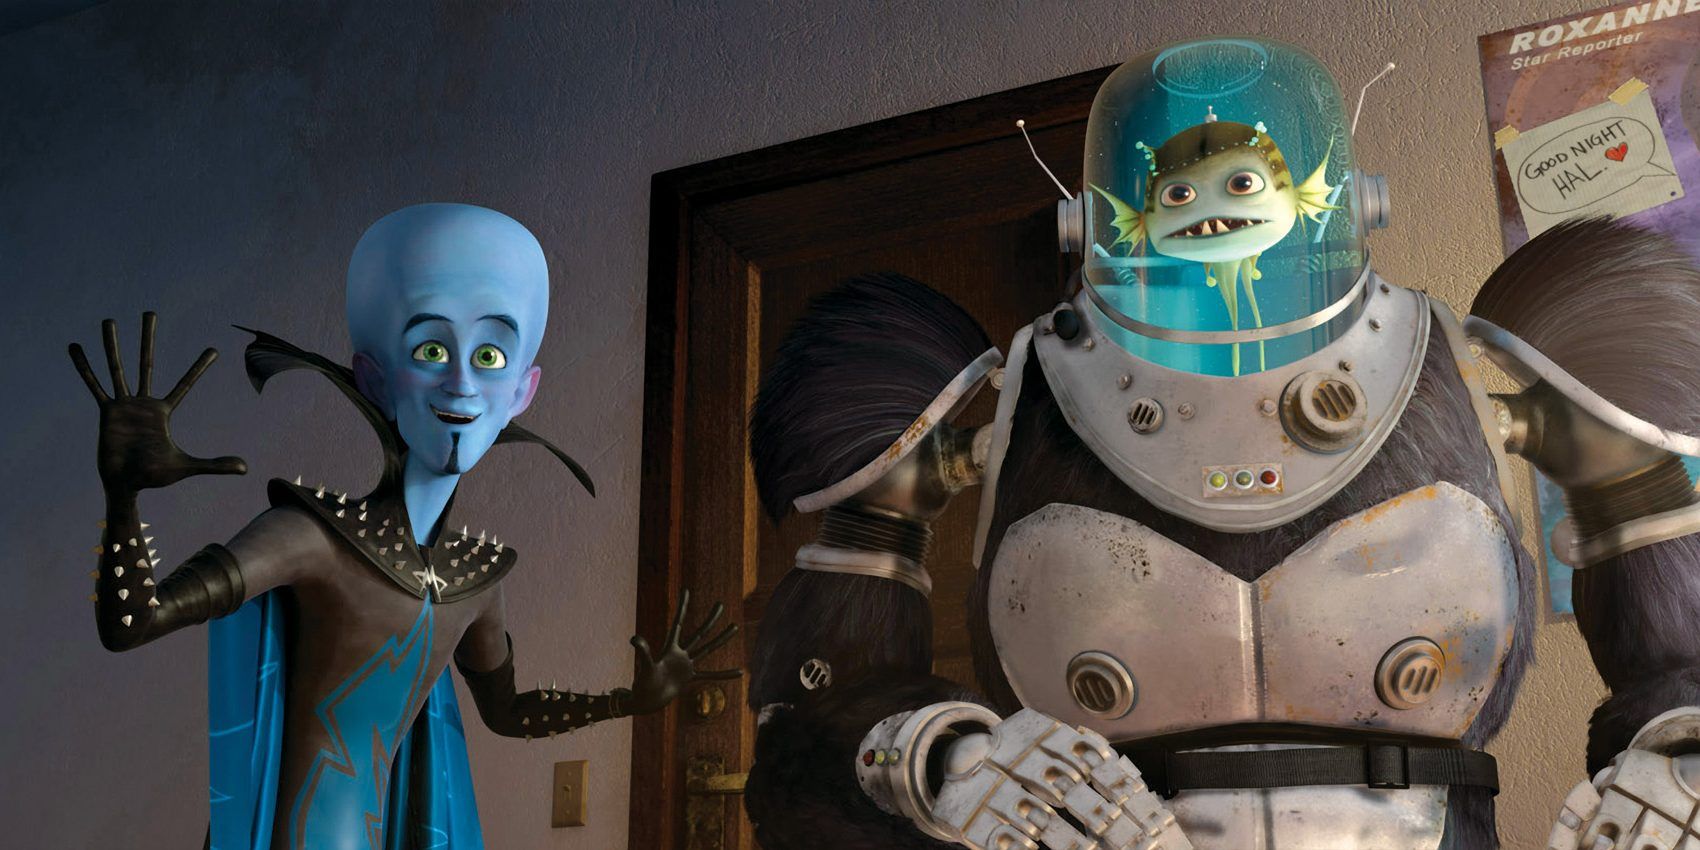 Megamind next to a robot with a fish tank for a head in Megamind.